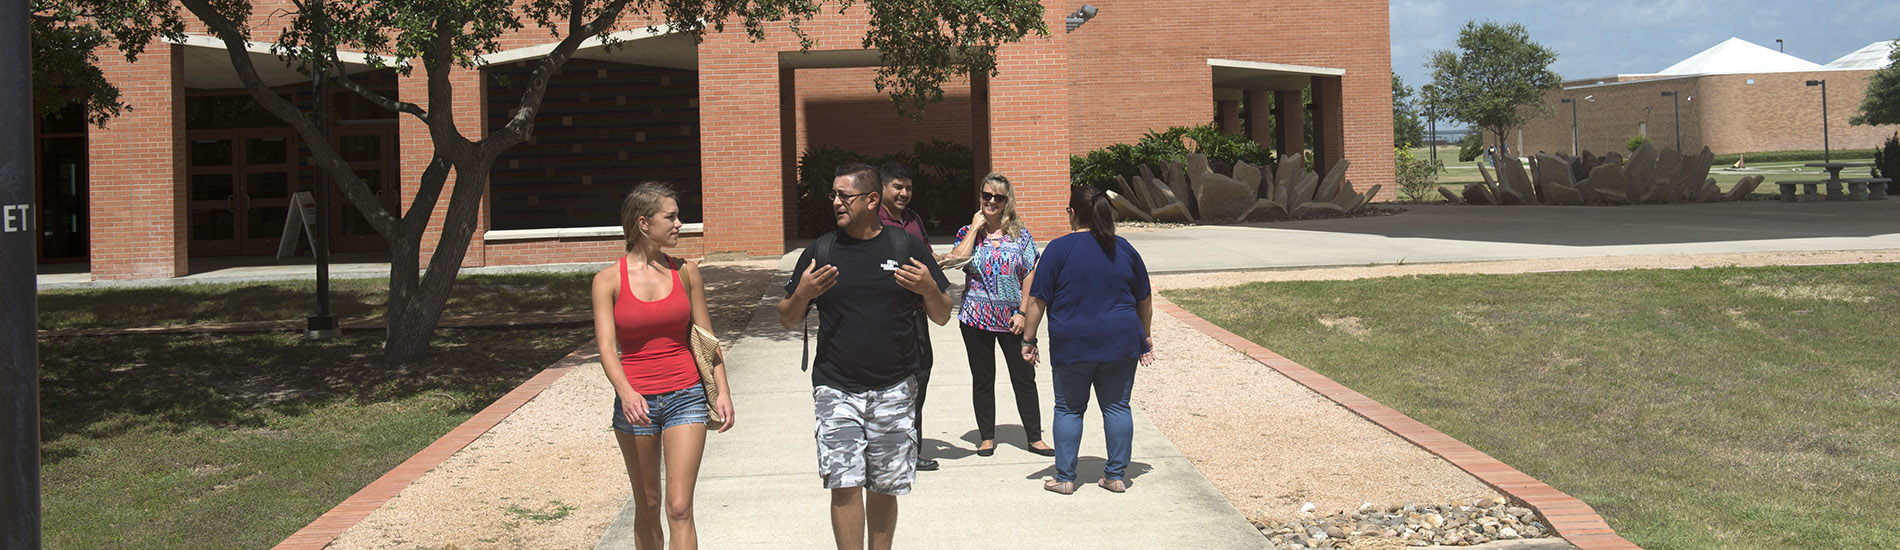 Students walking between Health Sciences and Emerging Technologies on West Campus